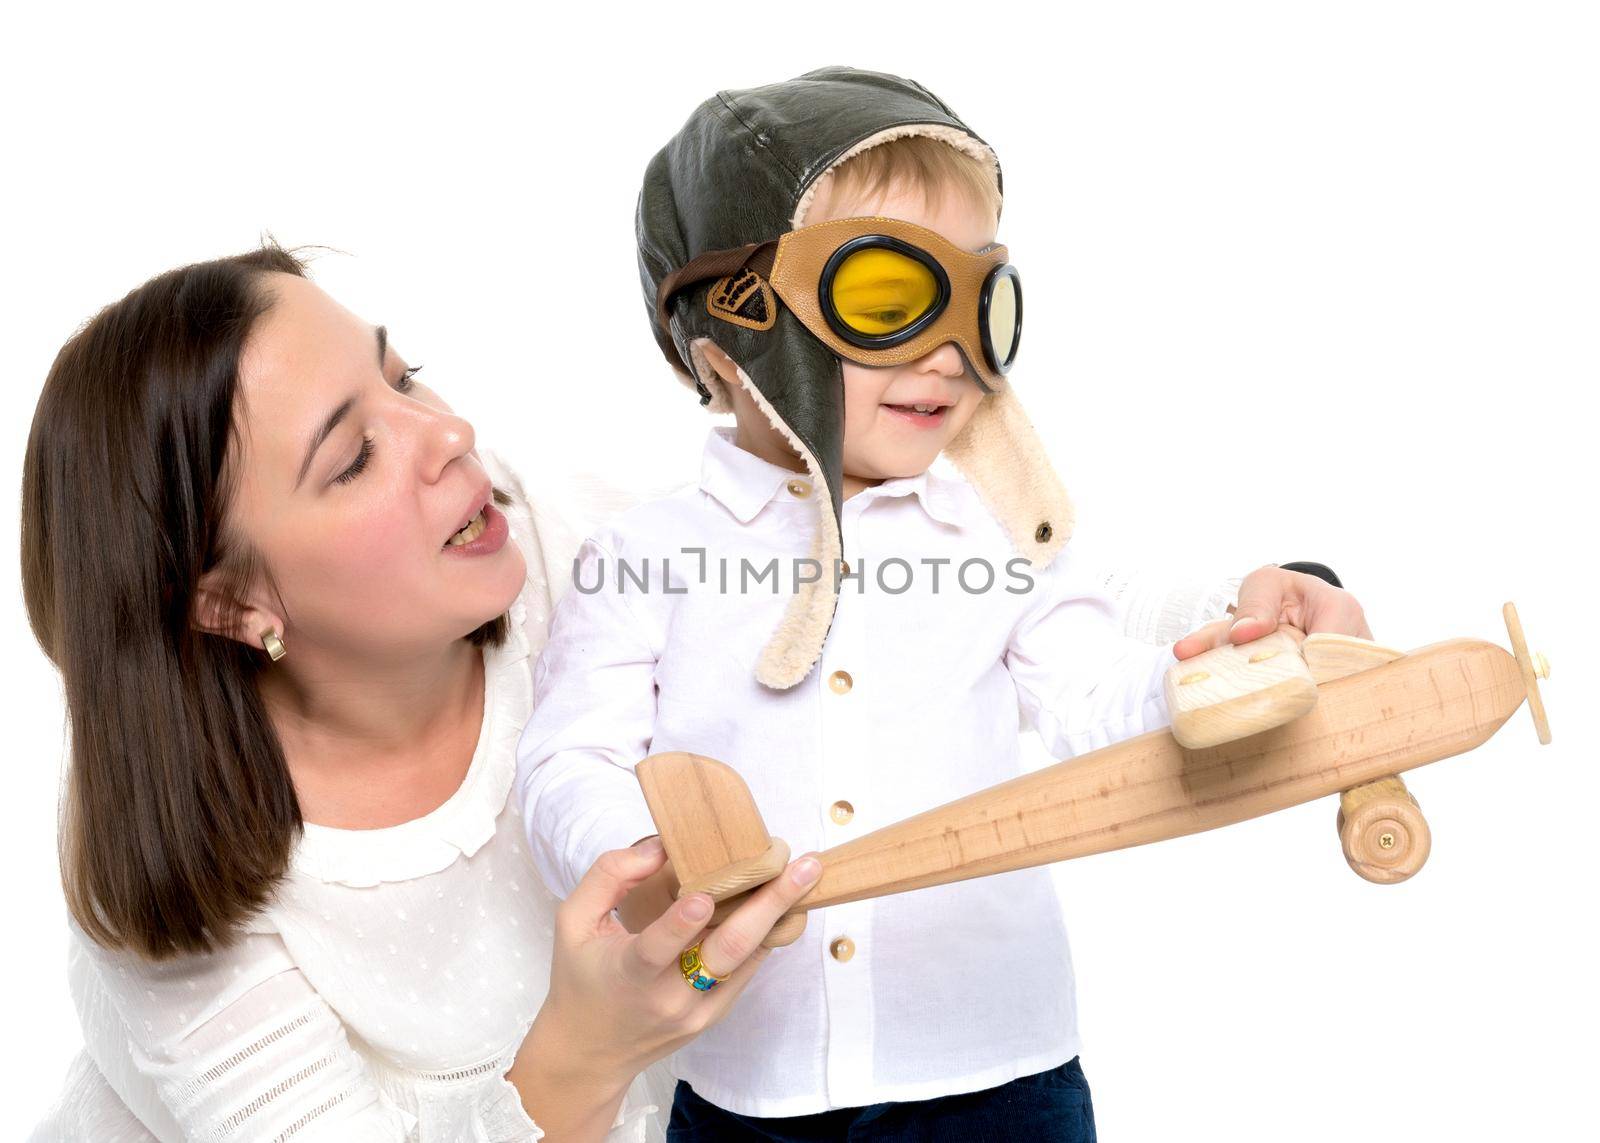 Mom and son are playing with a toy wooden plane. The concept of a happy childhood, raising a child in the family. Isolated on white background.